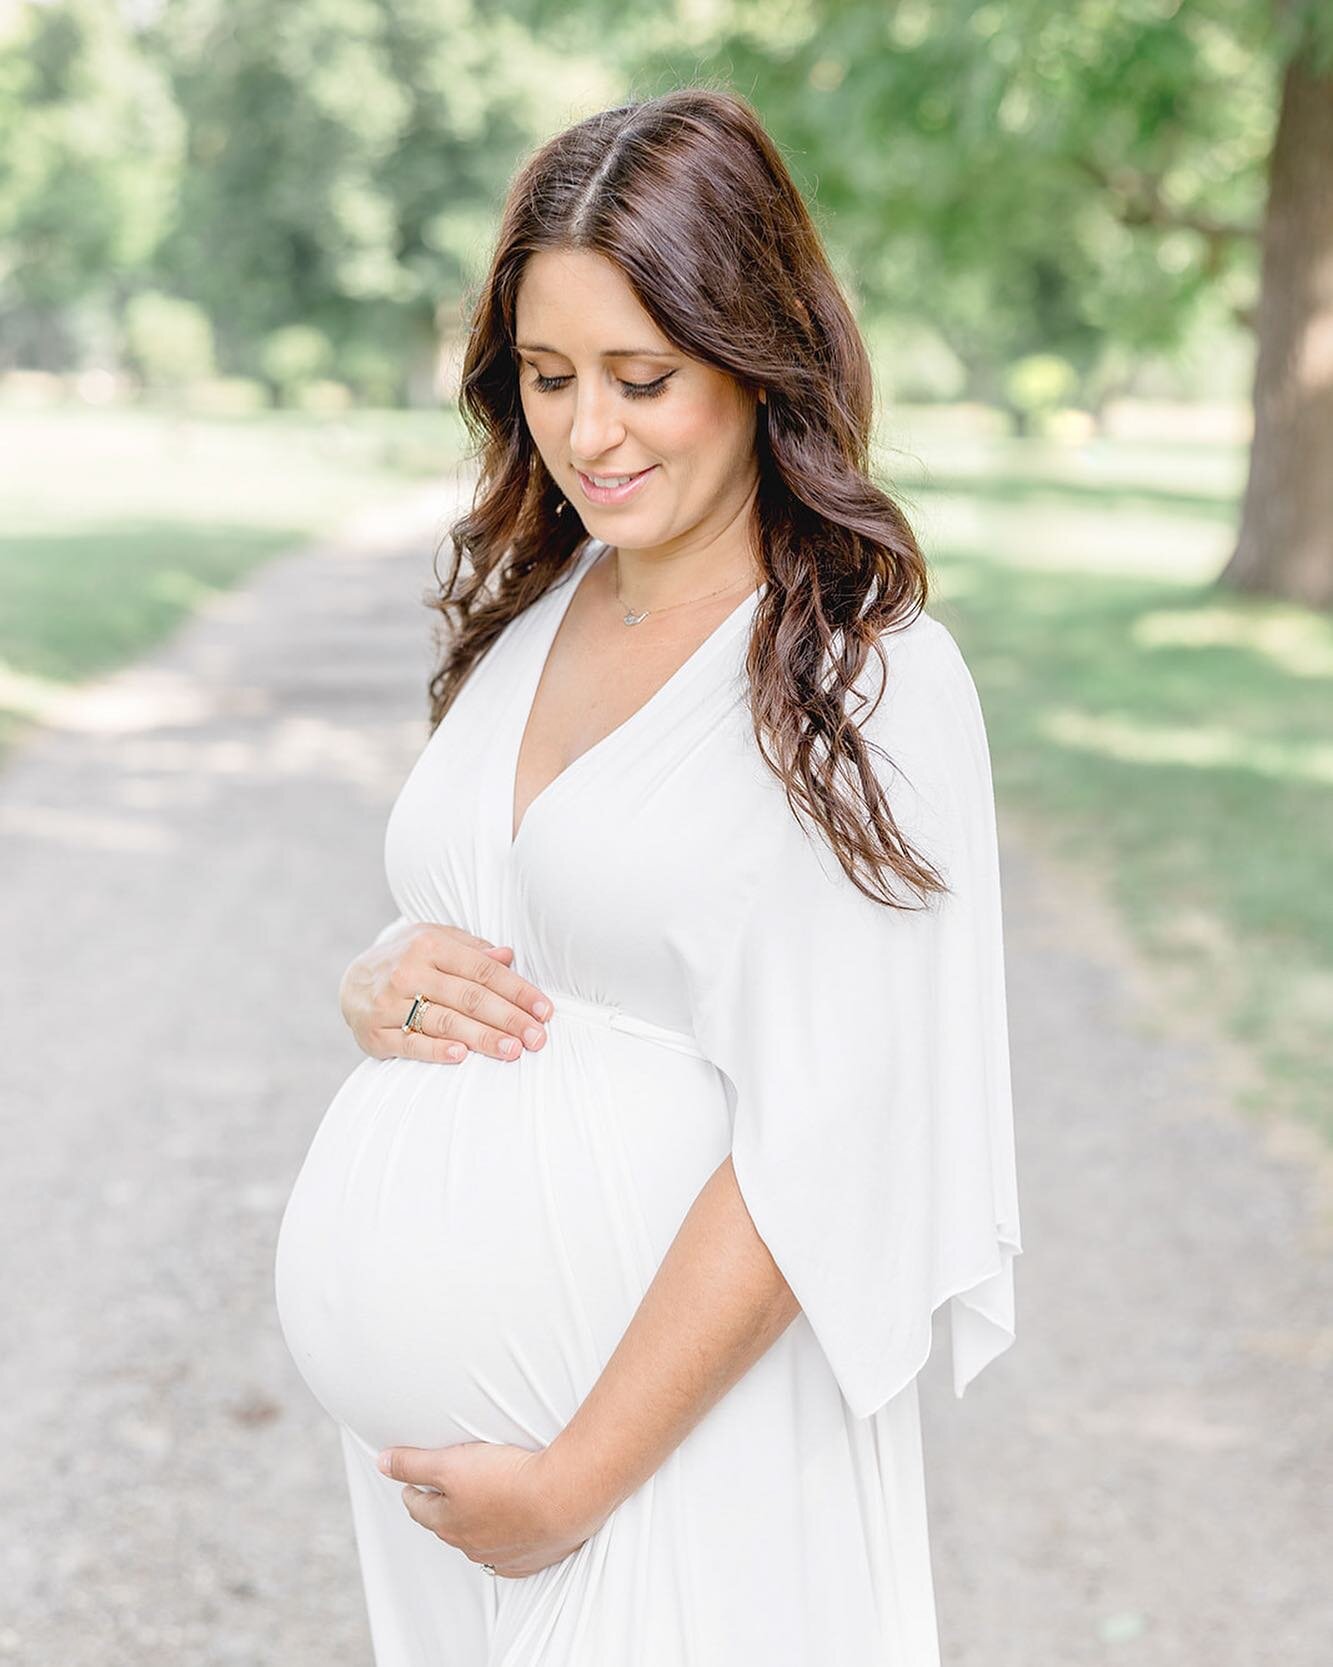 Your pregnancy lasts such a short time (though I know it doesn&rsquo;t always feel that way when you are in the midst of it!). Many women choose to skip this session and I get  where they are coming from. I chose not to do a maternity session as well